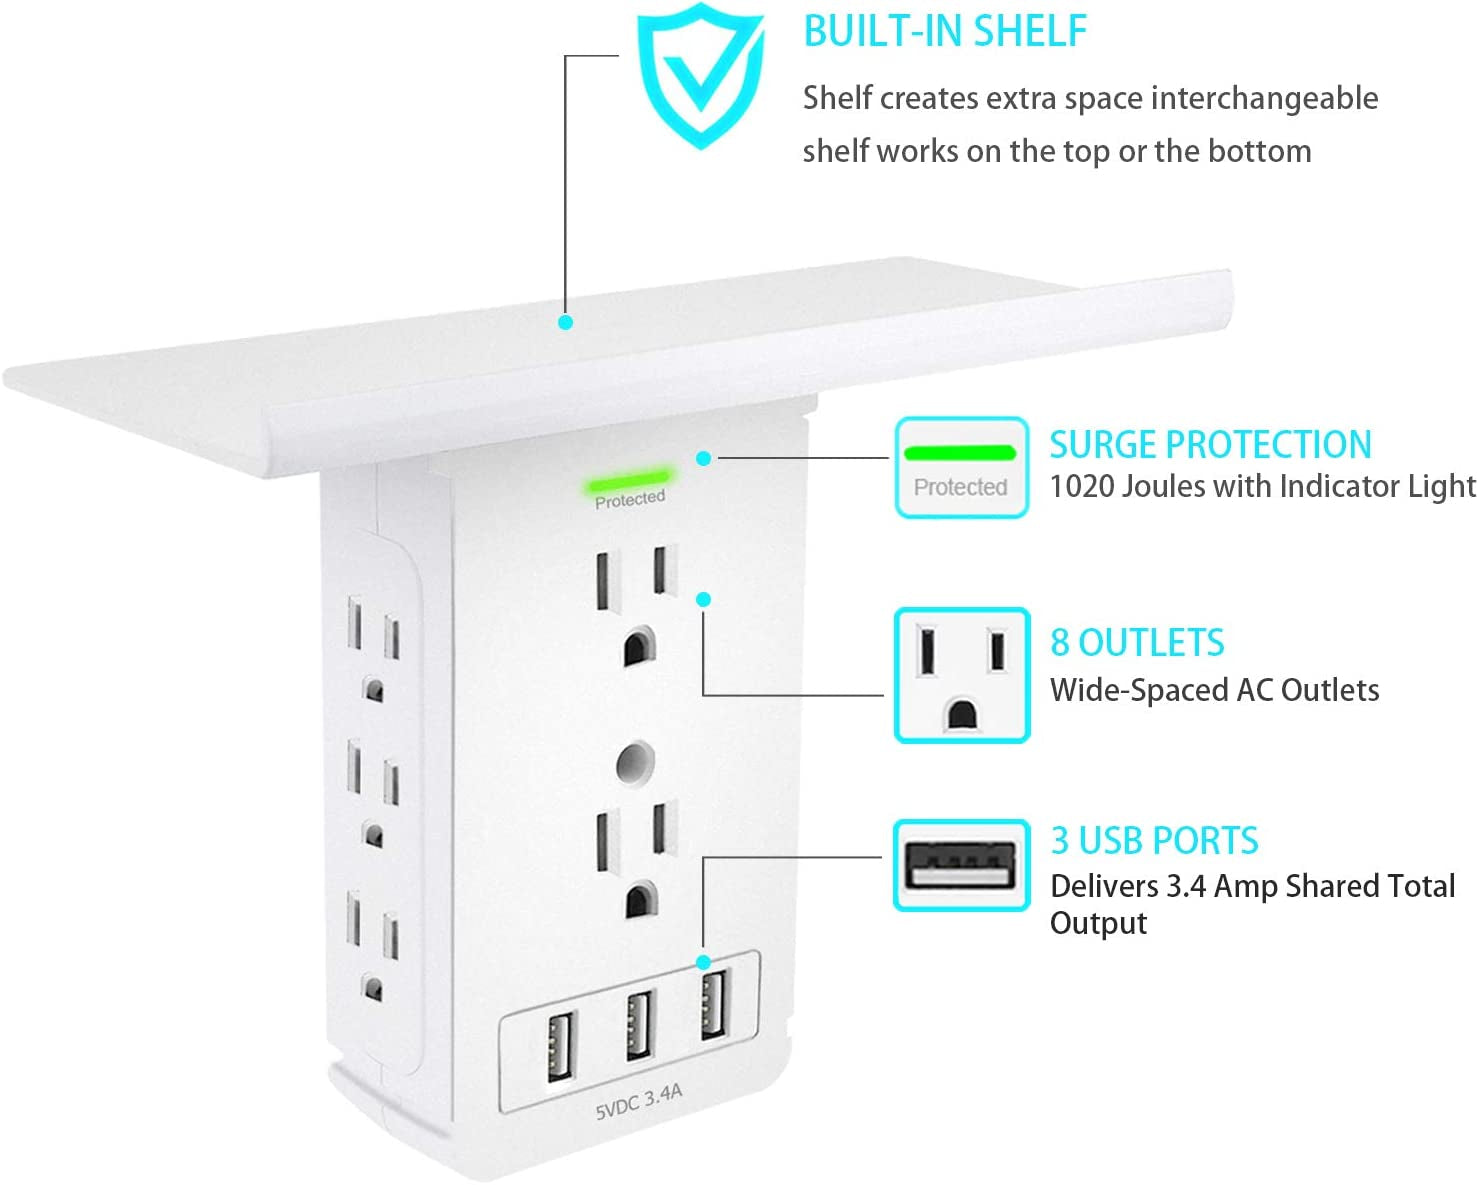 Wall Outlet Shelf with 3 USB Charging Ports - Everyday-Sales.com